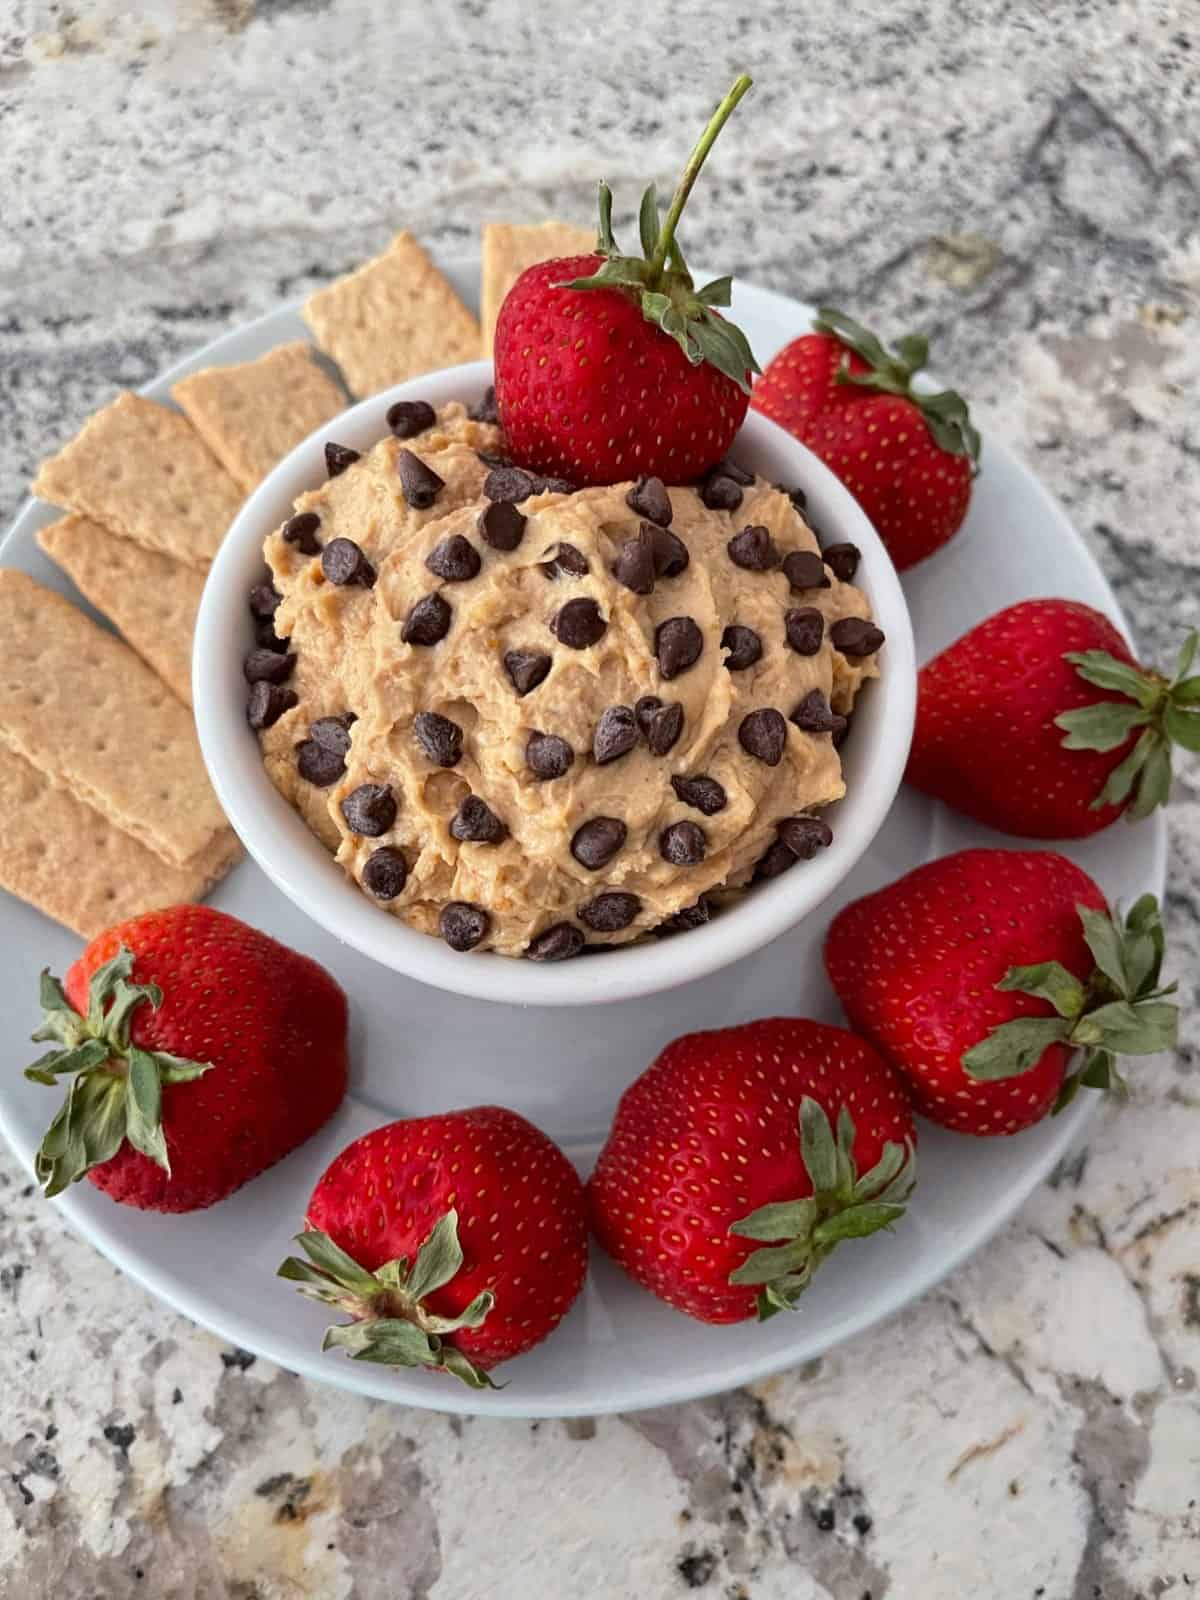 Peanut butter cup fruit dip with fresh strawberries and graham crackers.